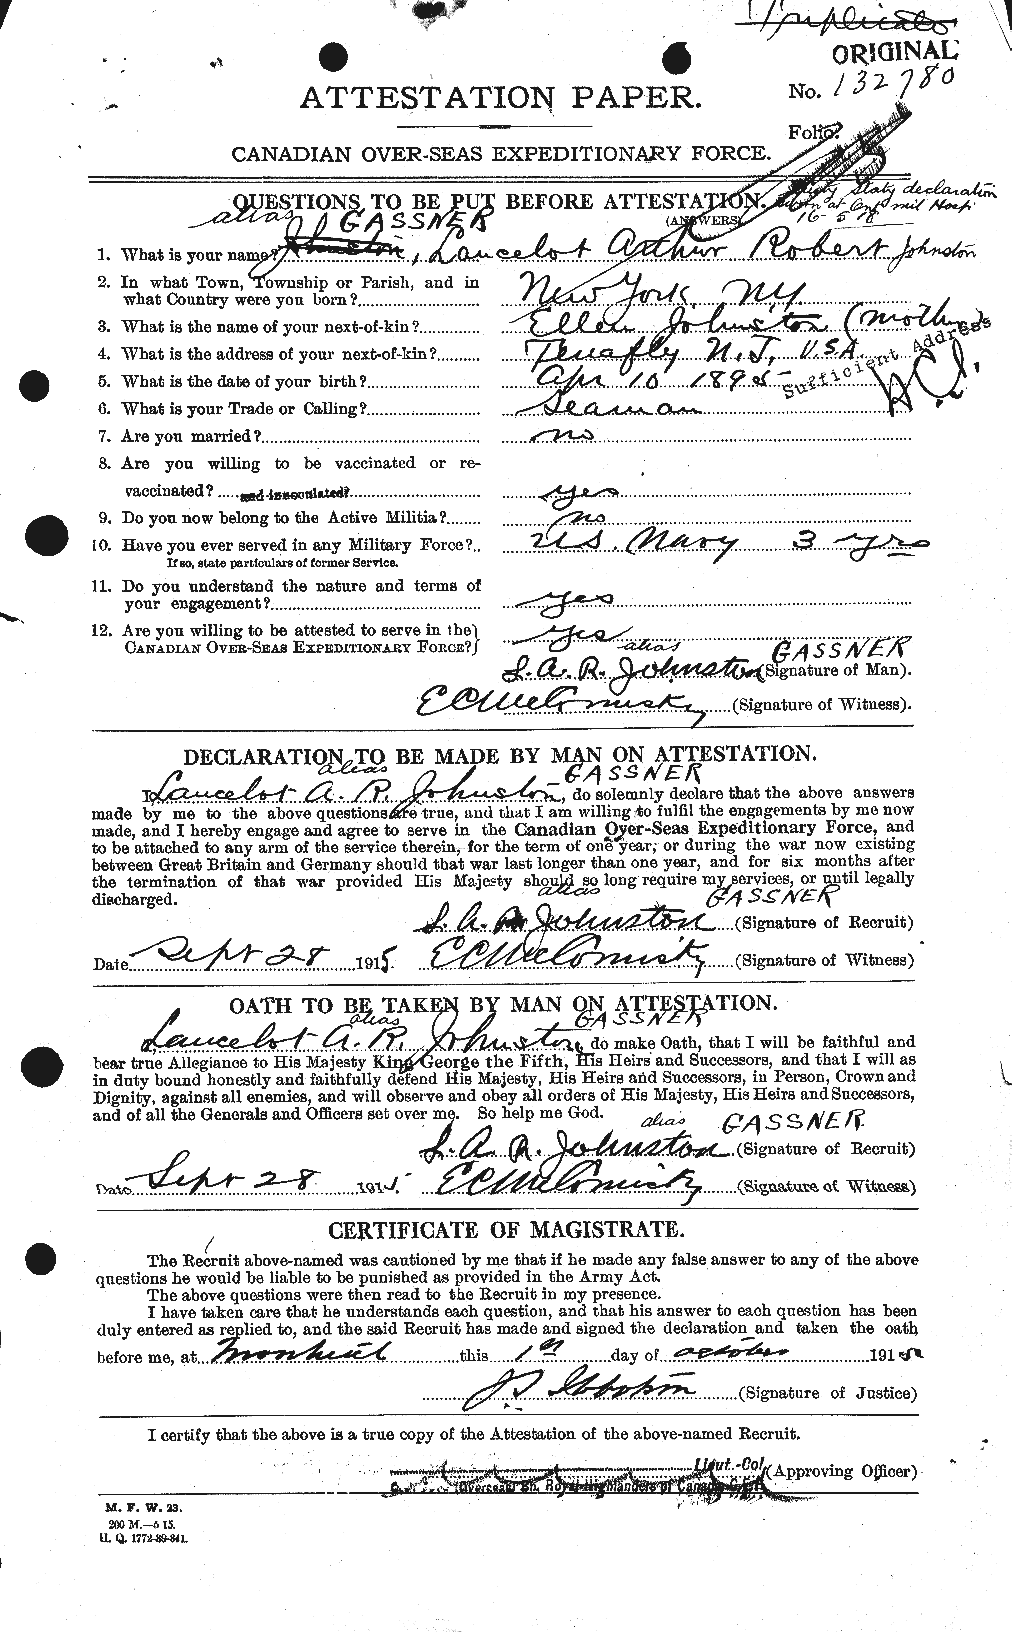 Personnel Records of the First World War - CEF 341632a